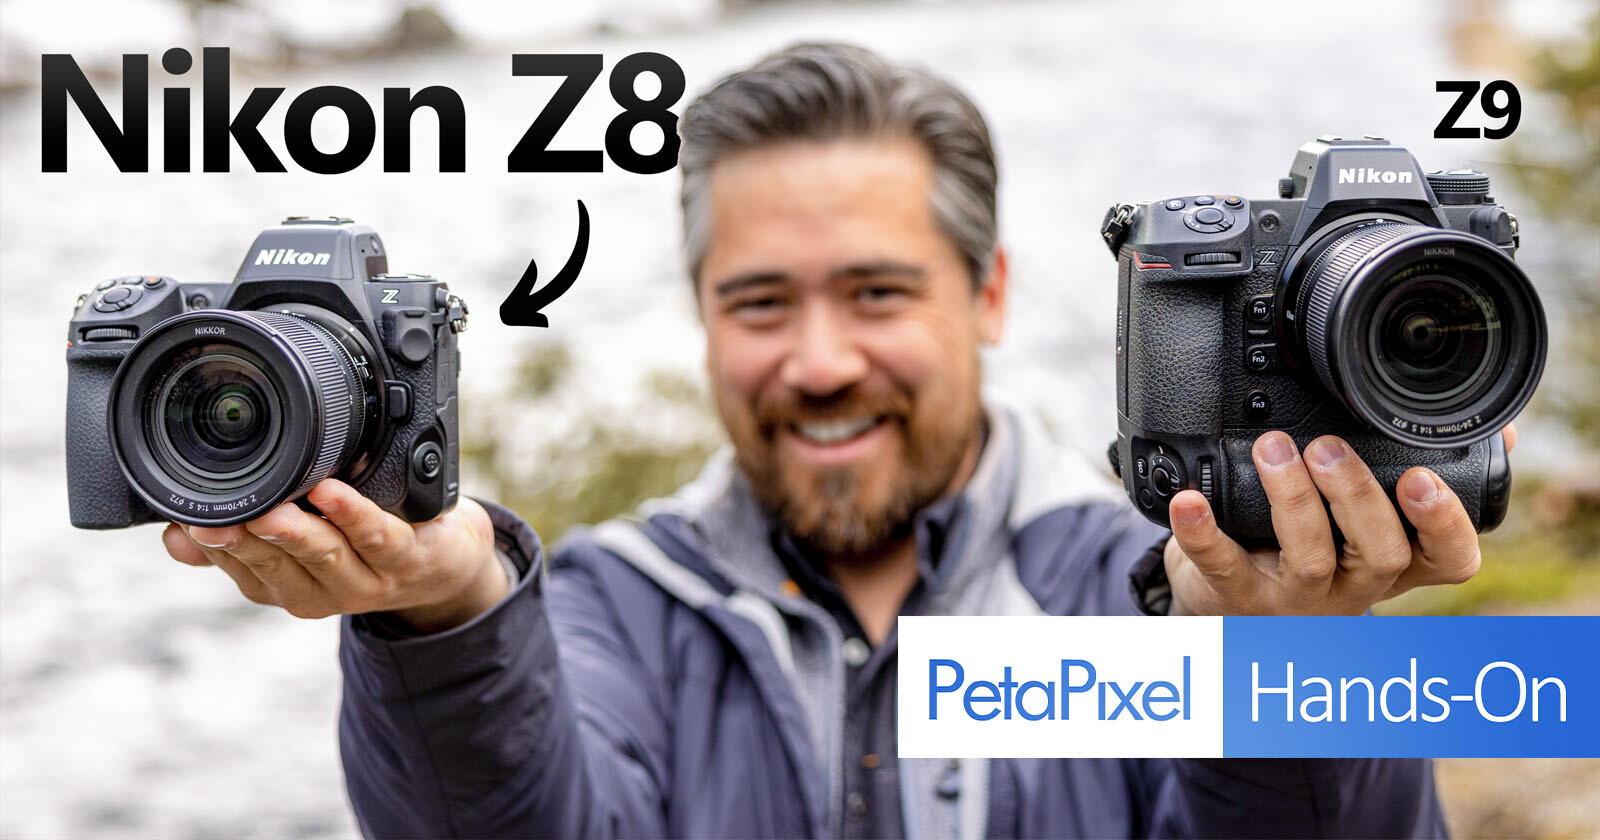 Nikon Z8 Hands-On: This Apple Didnt Fall Far From the Z9 Tree